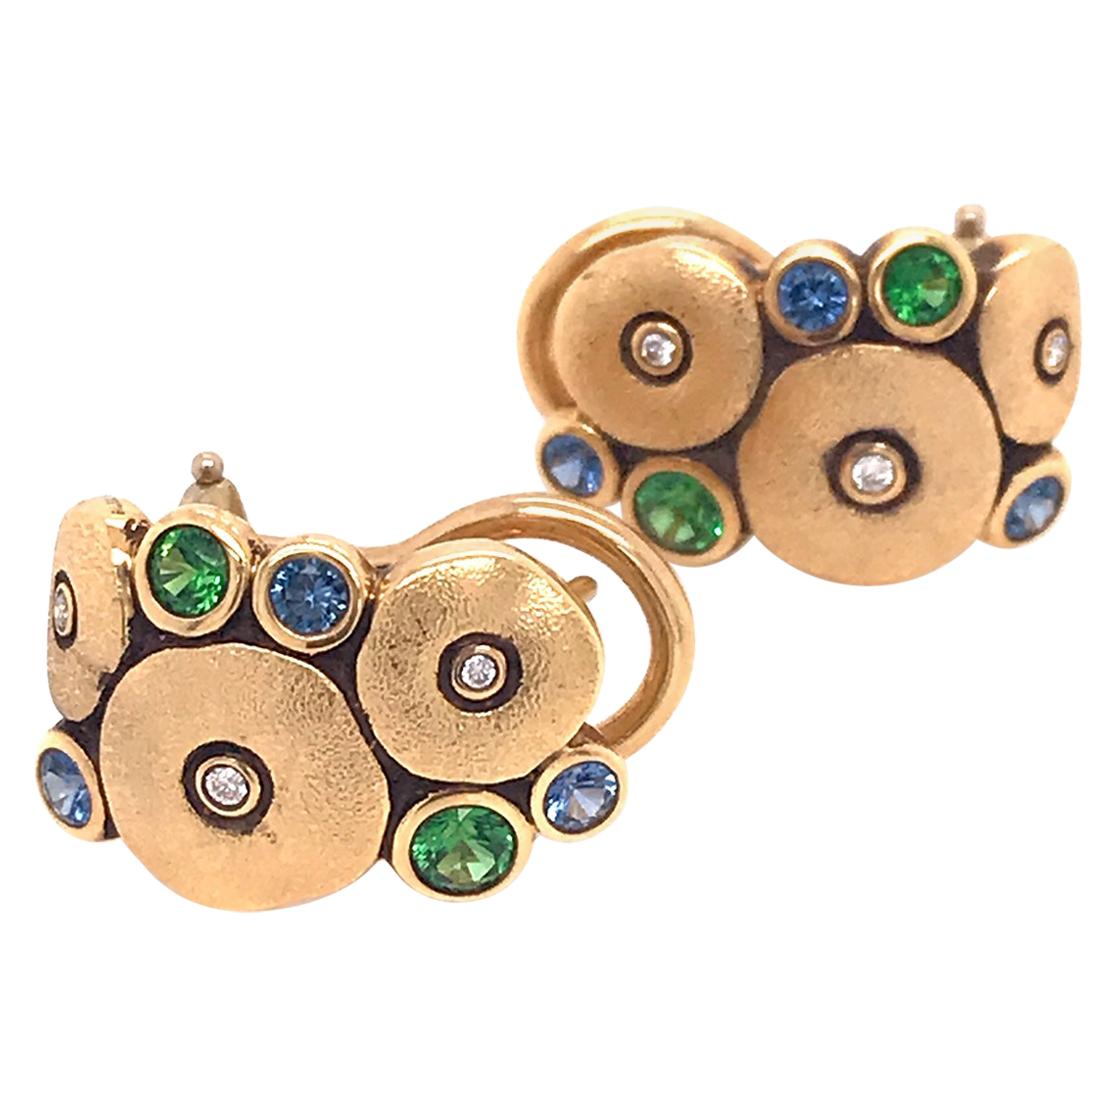 Alex Sepkus "Orchard" Earrings with Blue Sapphires and Green Tsavorites in Gold